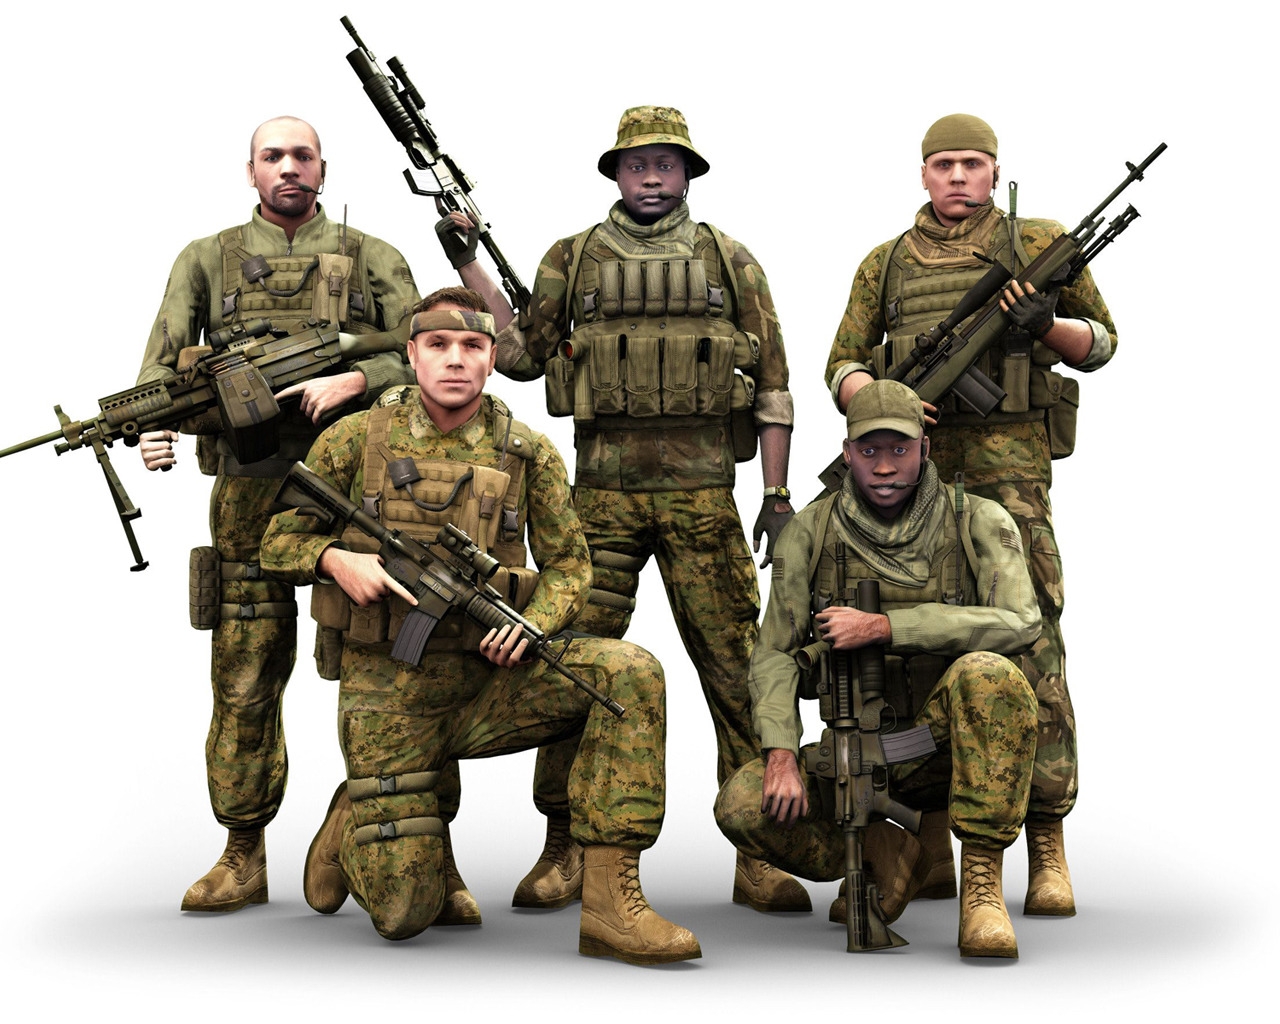 ArmA 2 Characters for 1280 x 1024 resolution